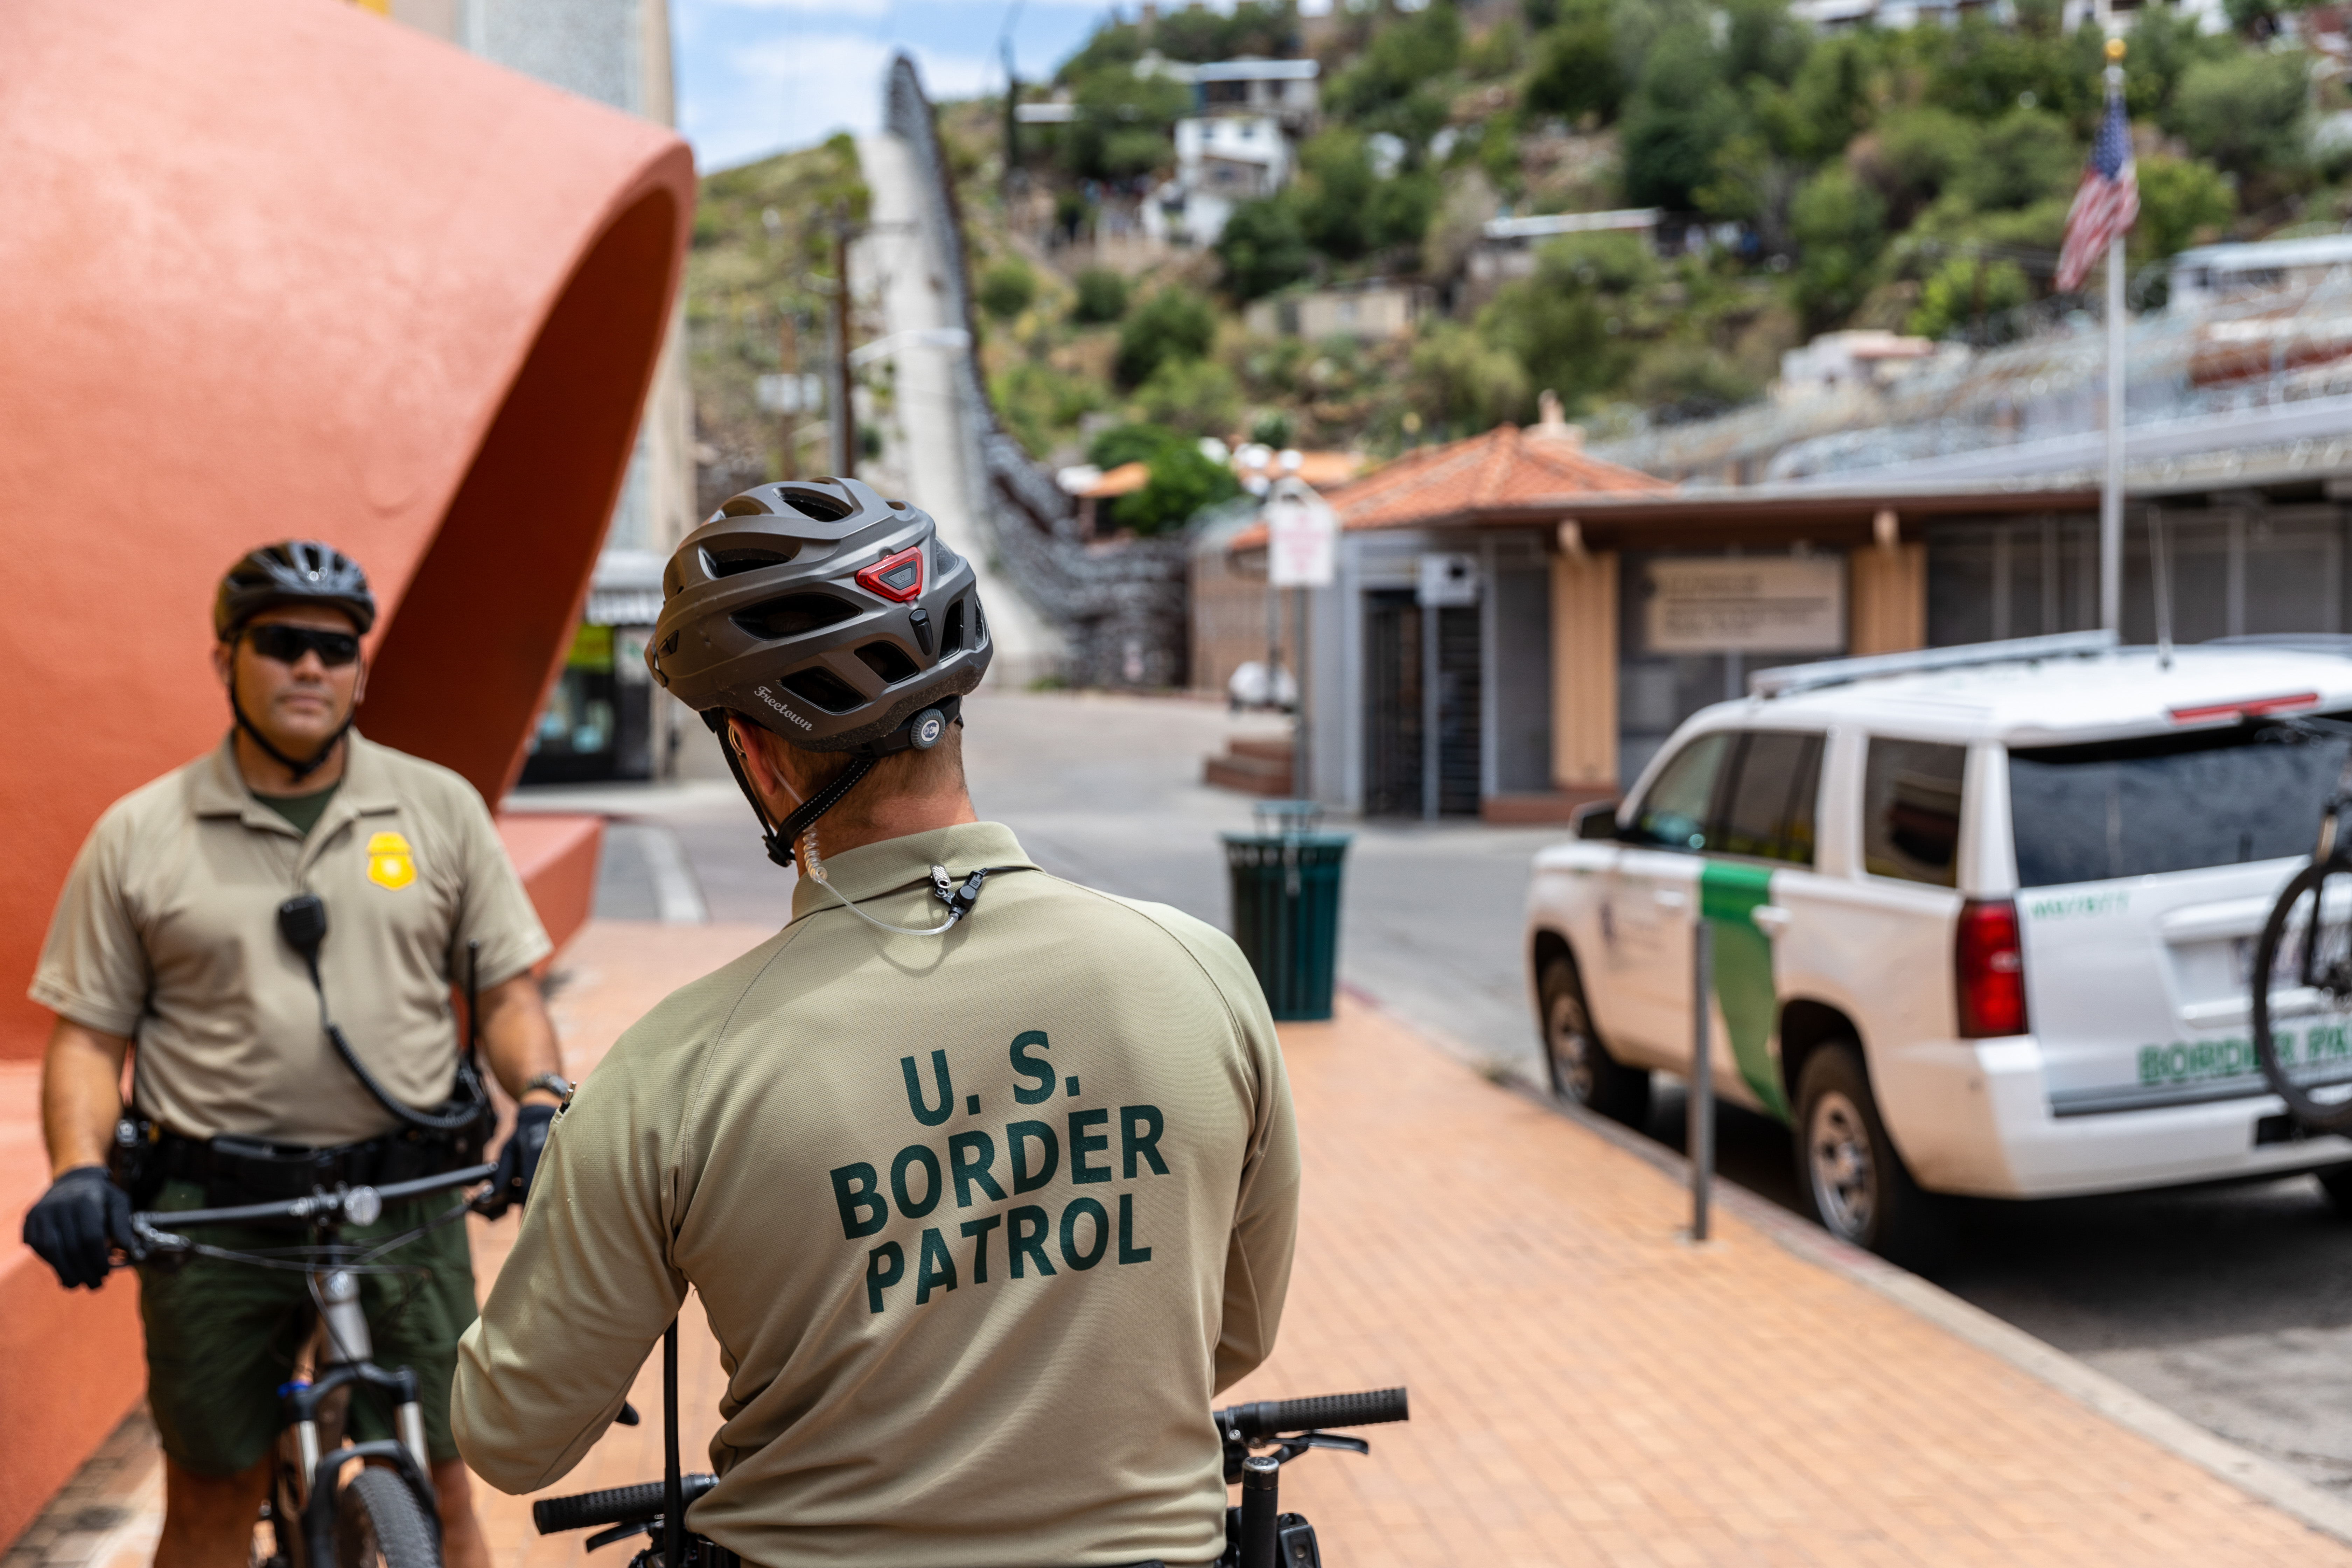 Picture of border patrol agents on bike looking at each other